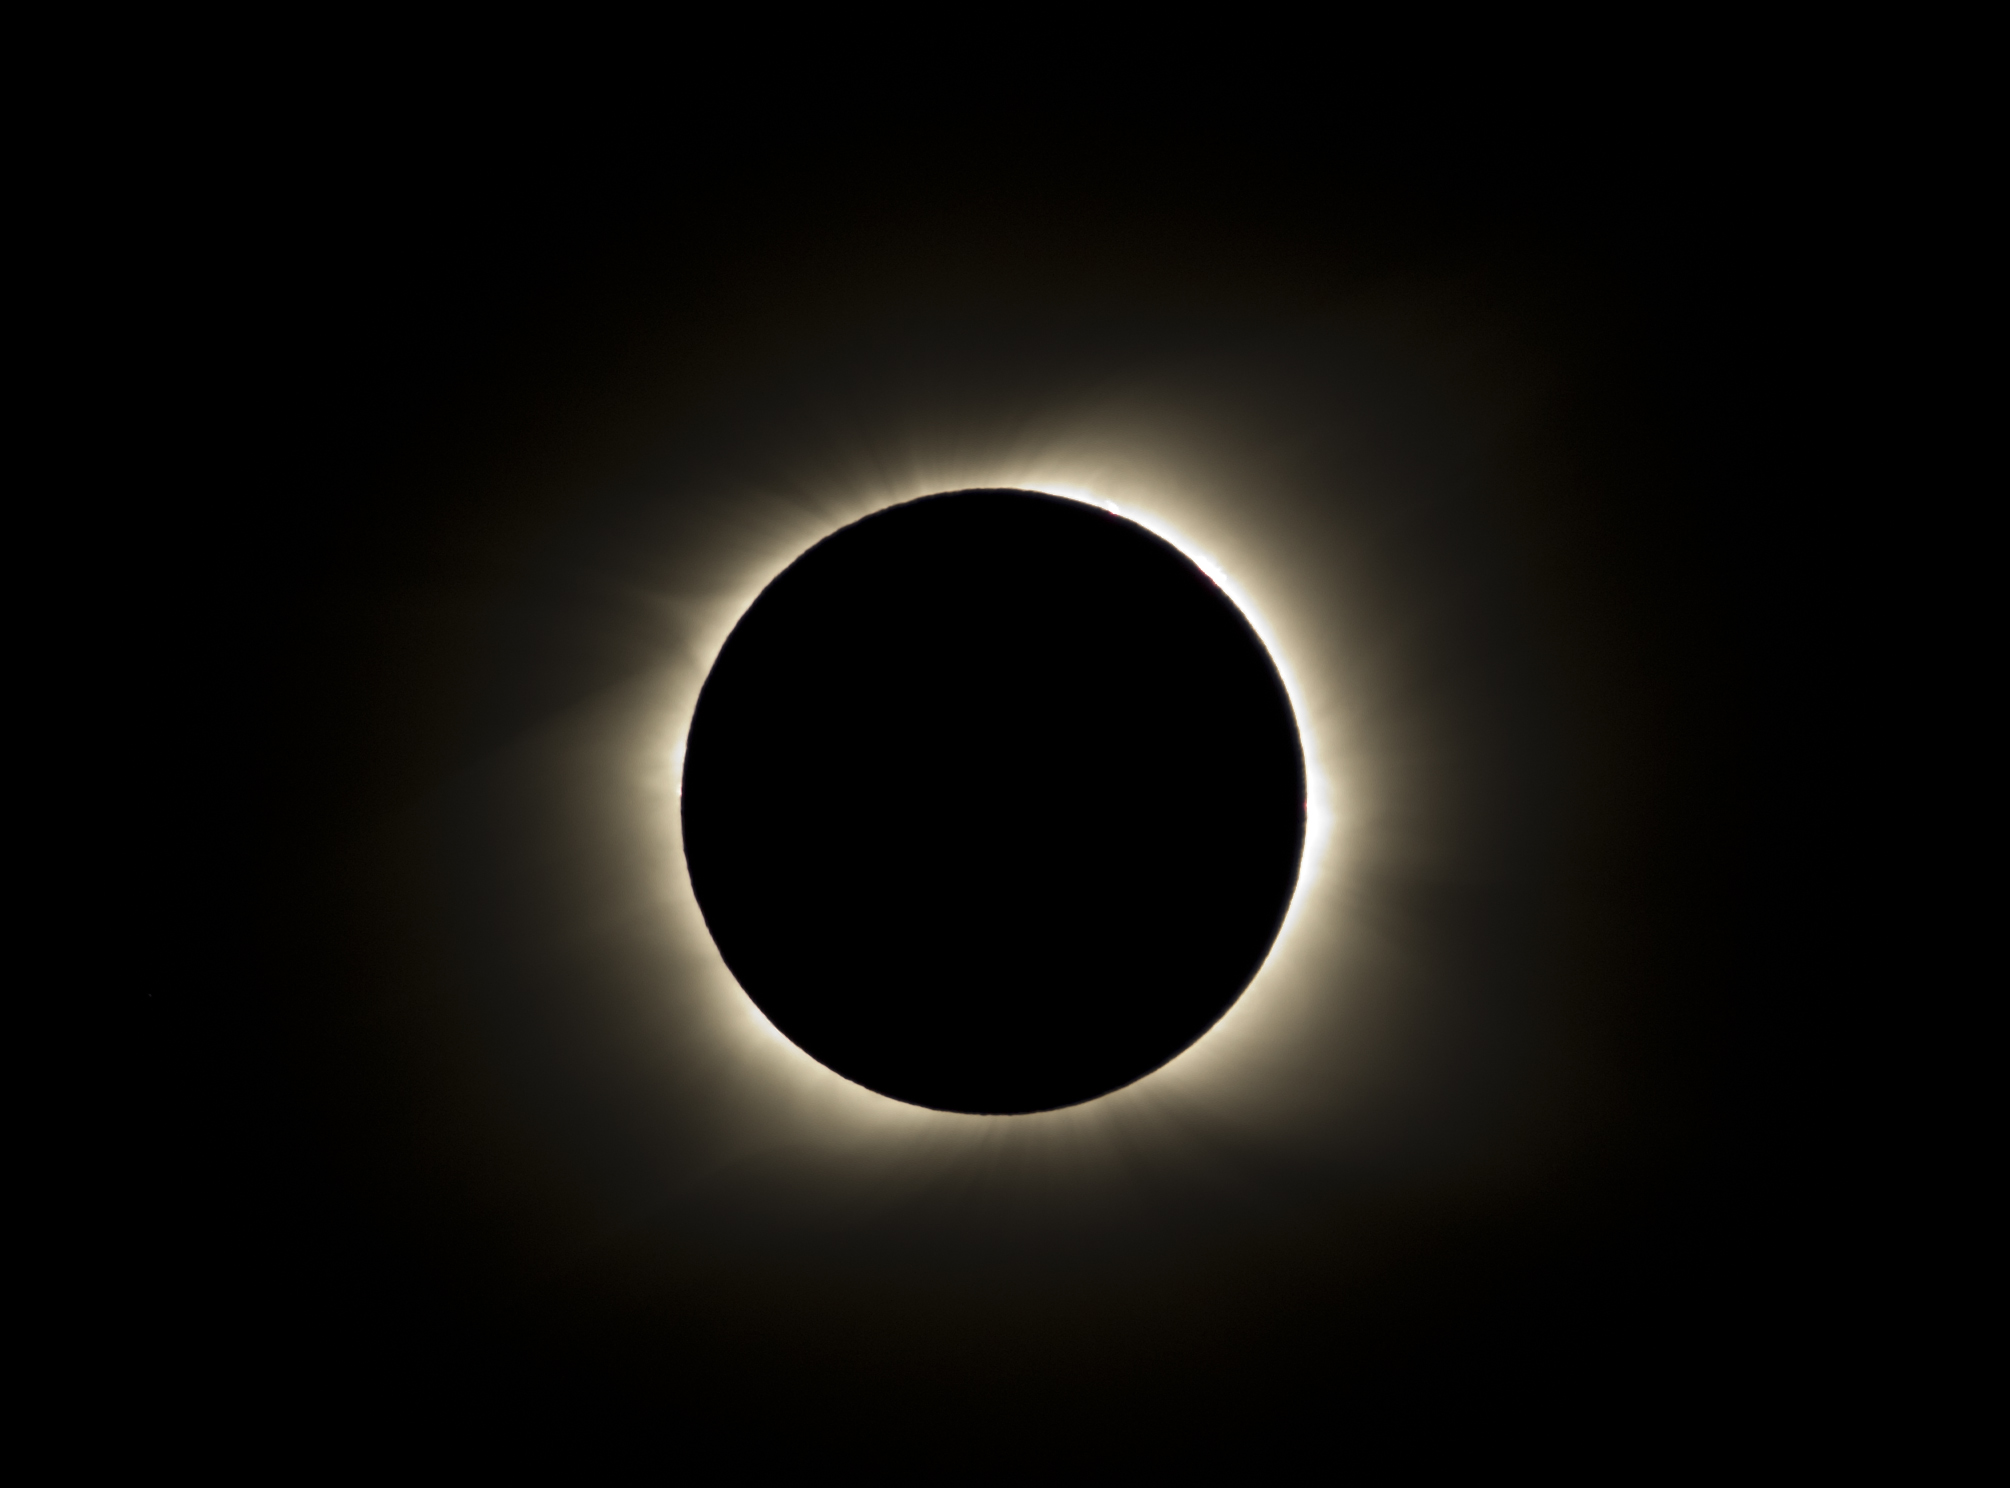 ksdk.com | How fast is the solar eclipse? And 32 other questions, answered2010 x 1488